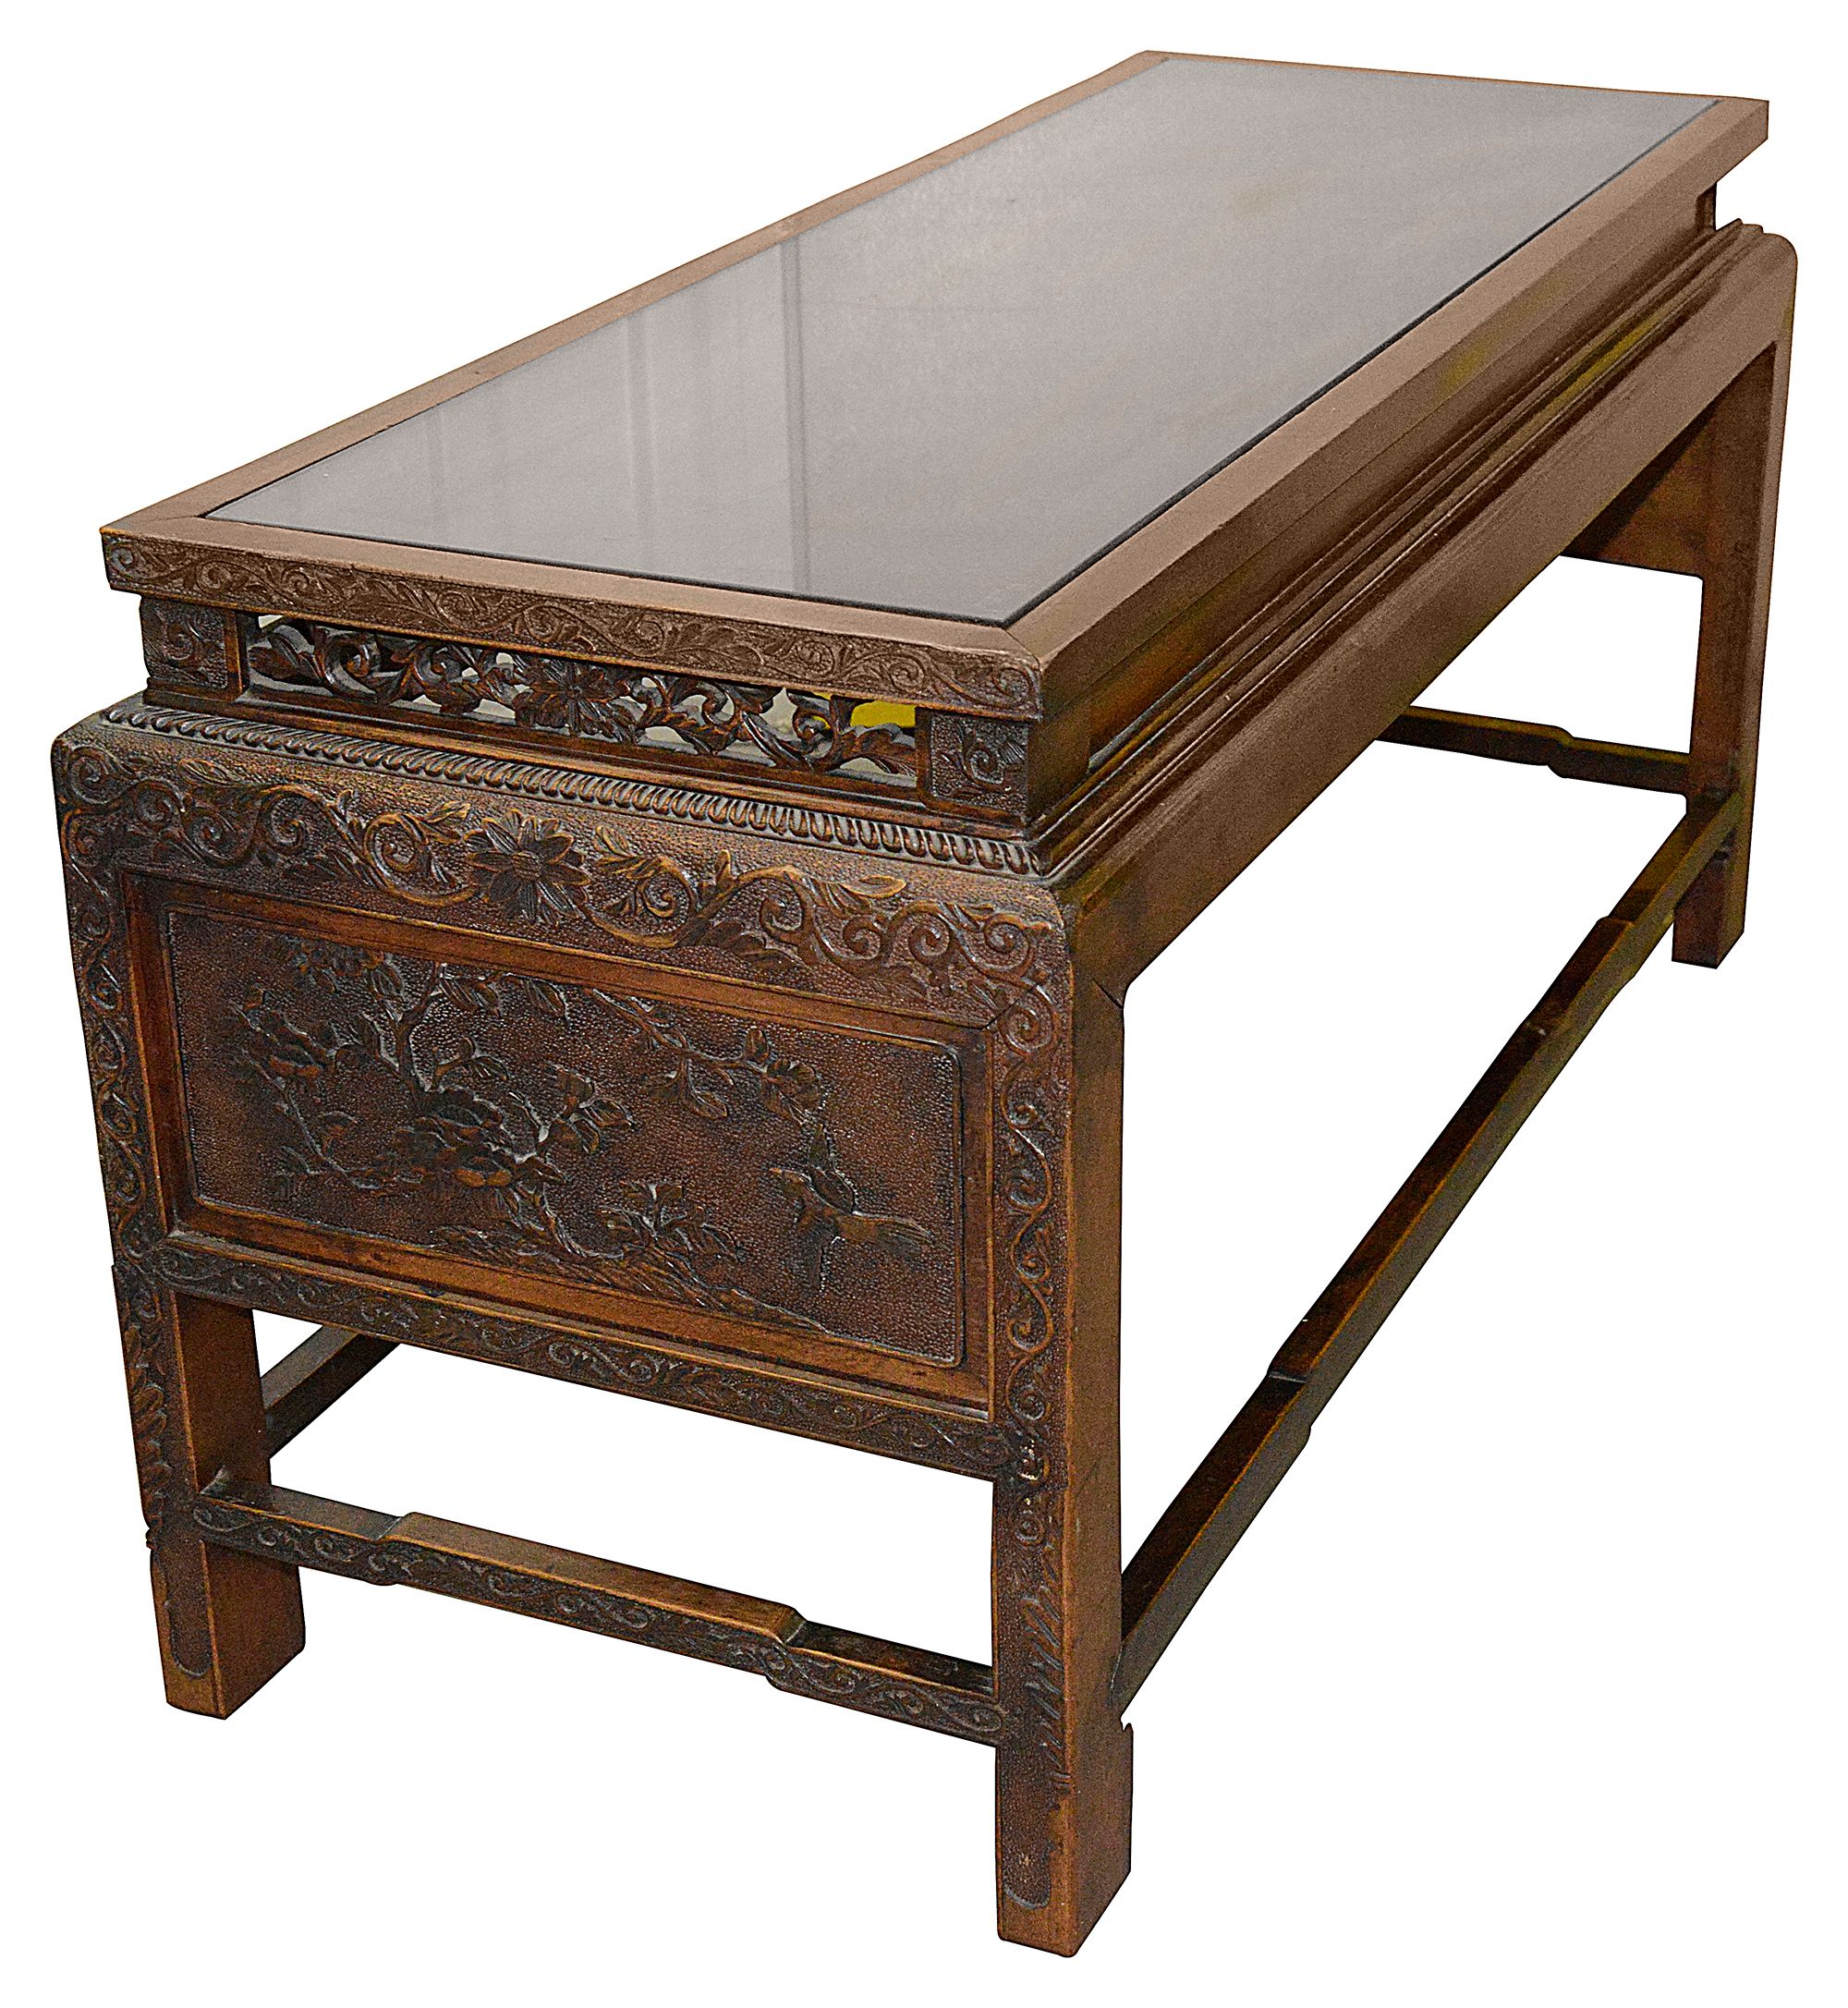 A late 19th century Chinese carved hardwood low table - Image 2 of 6